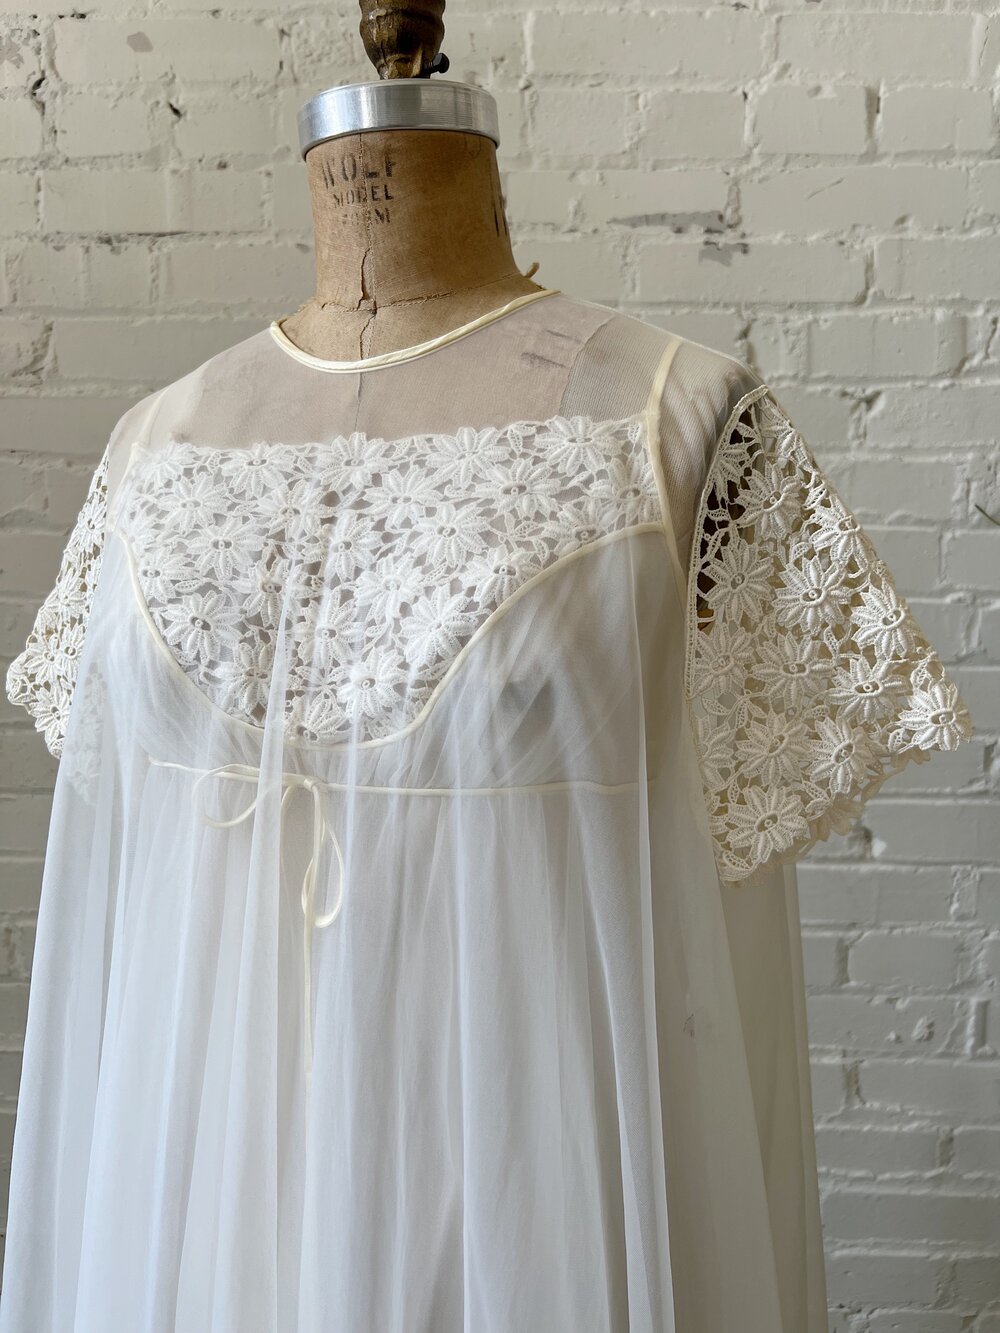 Sheer Nightgown & Overlay Gown w/Lace Sleeves Peignoir Set, Size Extra  Small — May's Place: Be Green. Buy Vintage.